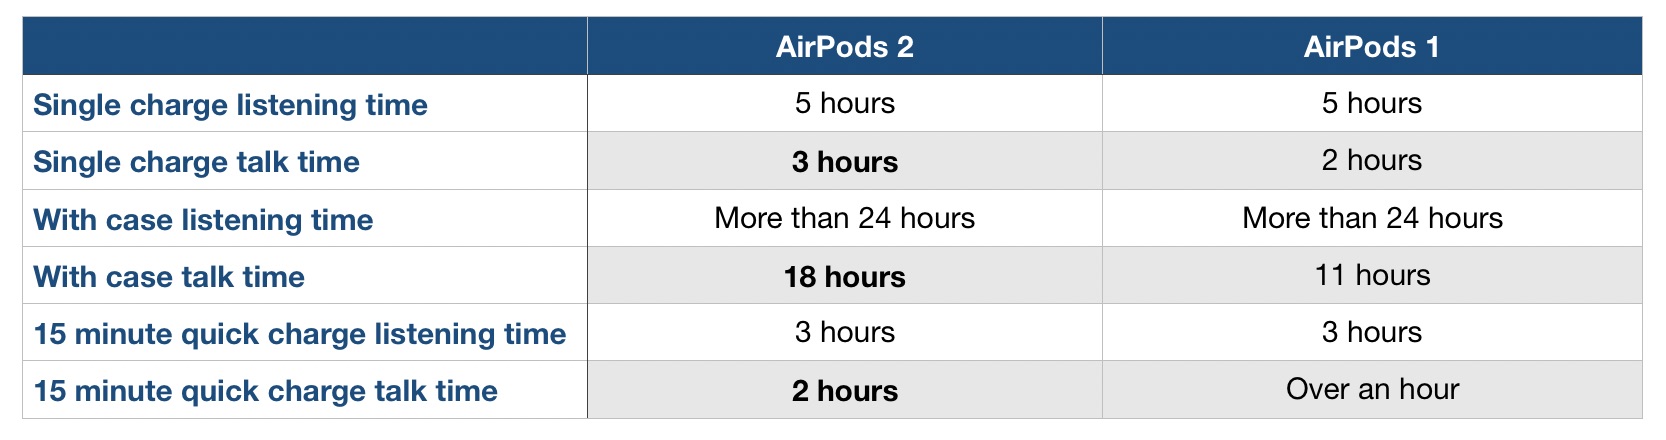 AirPods 2 battery life